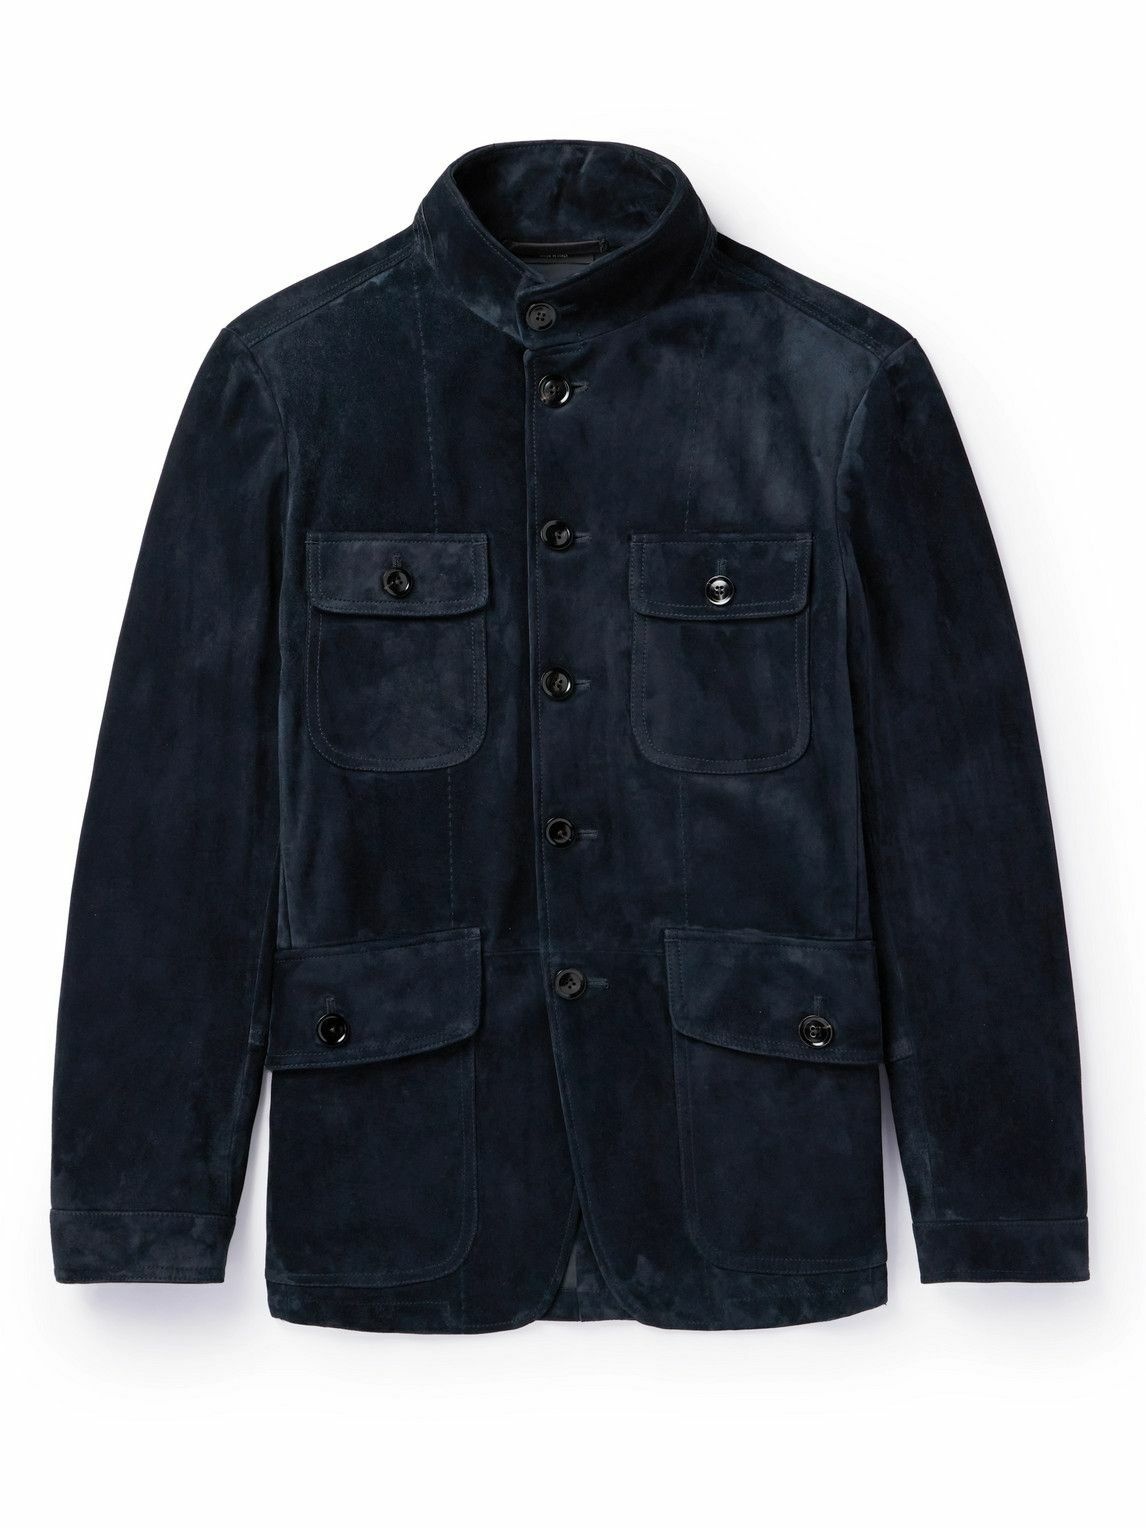 TOM FORD - Military Suede Jacket - Blue TOM FORD